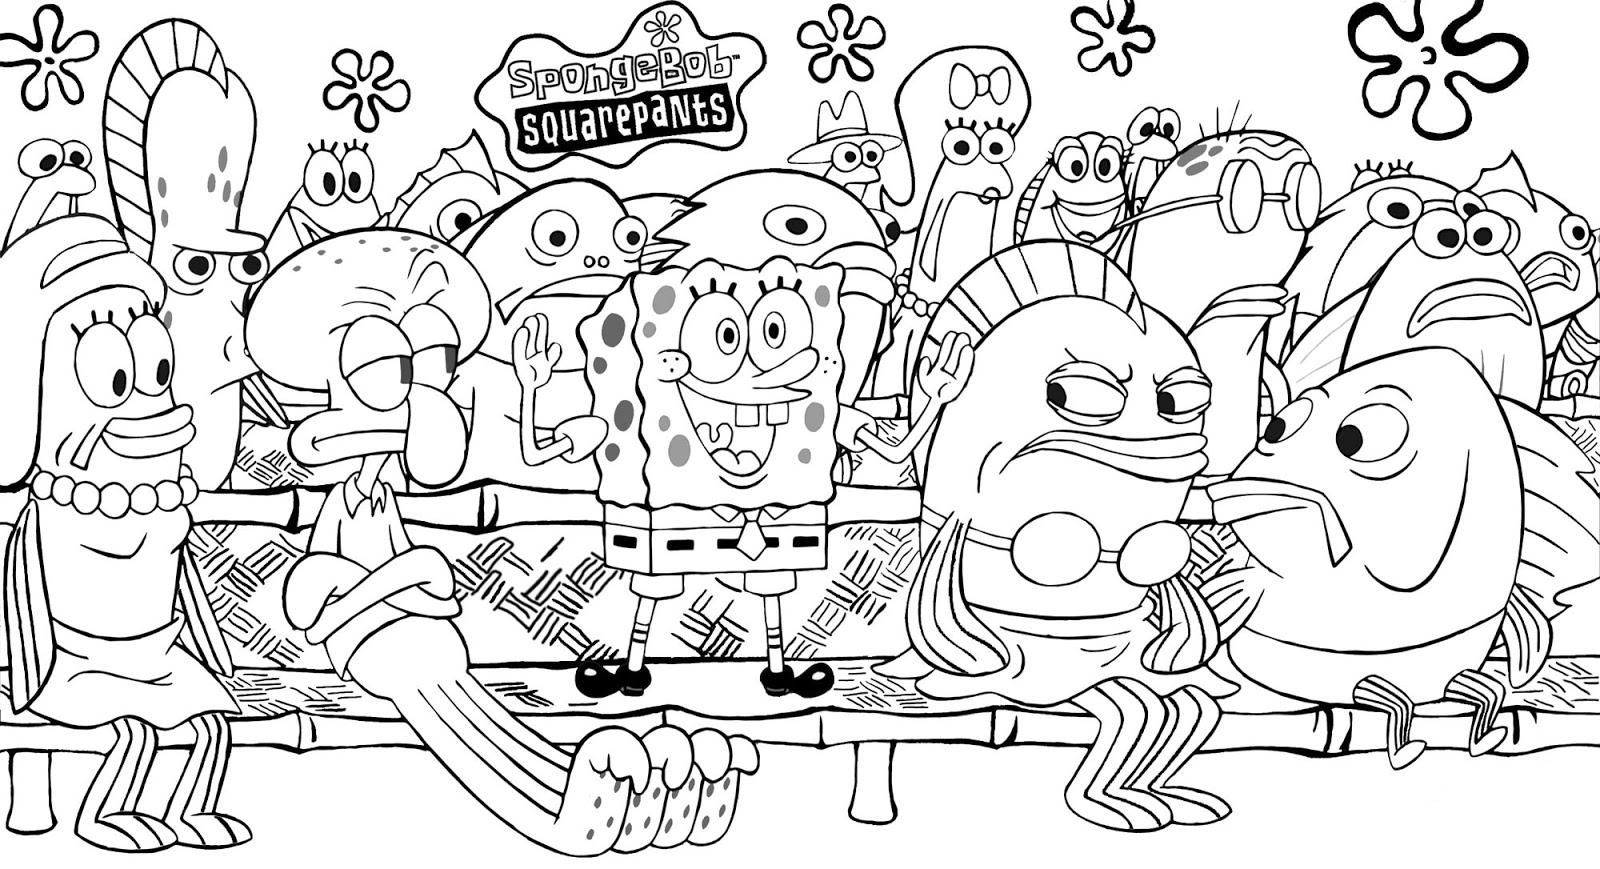 Spongebob Characters 45 Cool Coloring Page